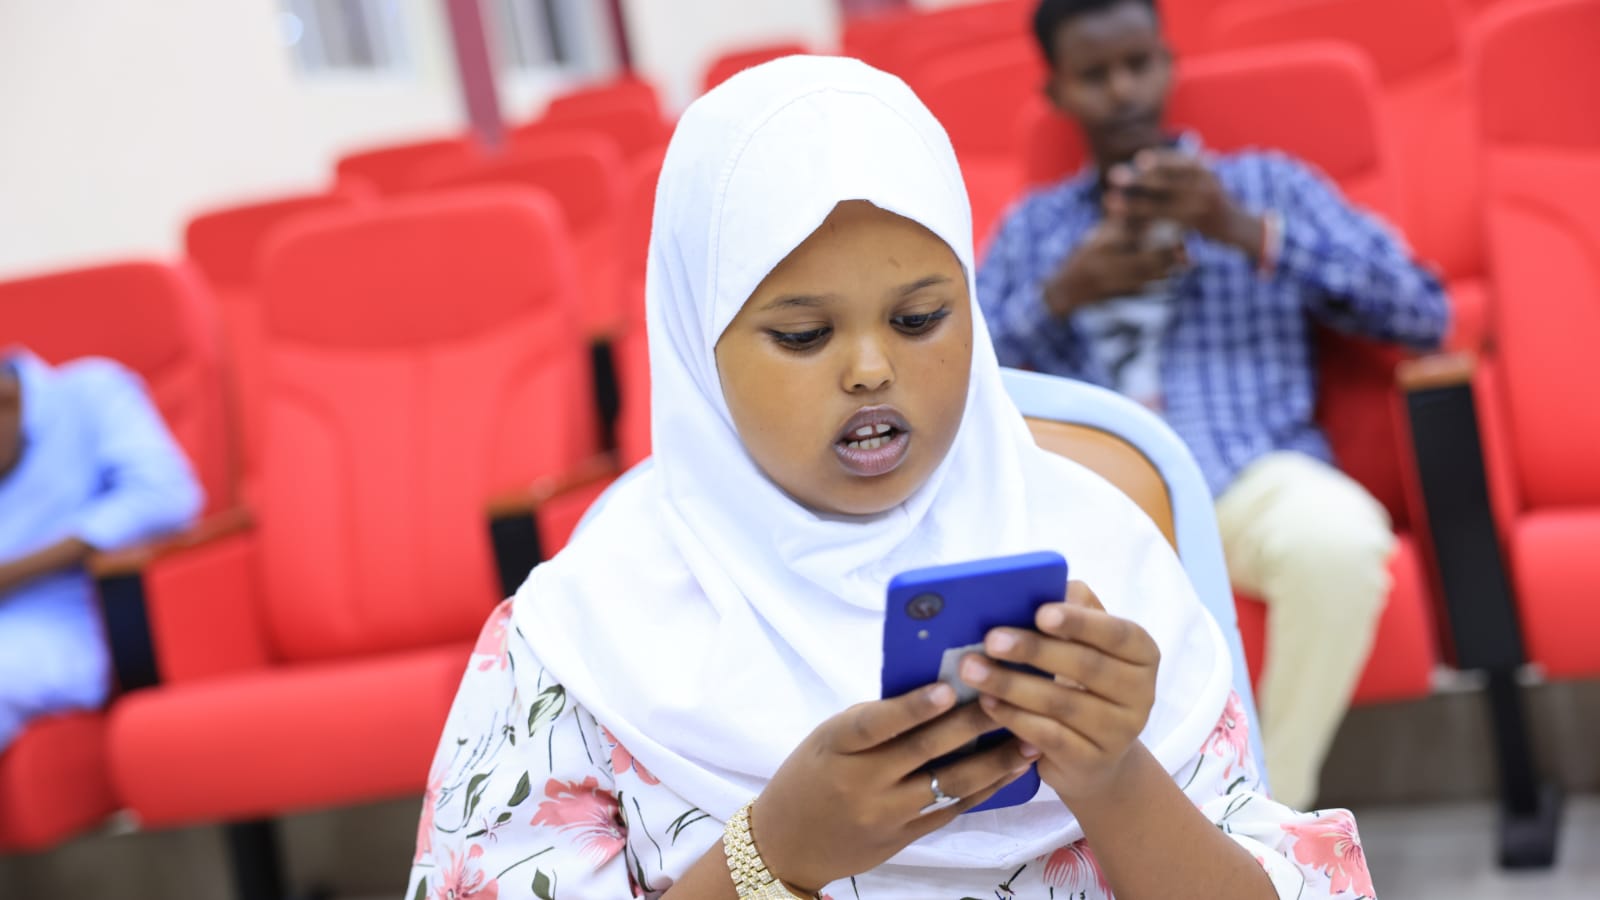 Over 350,000 children and adults across the Horn of Africa (Somaliland, Somalia, Ethiopia, Djibouti and Kenya) are learning to read and write in Somali with a free language app, Daariz.